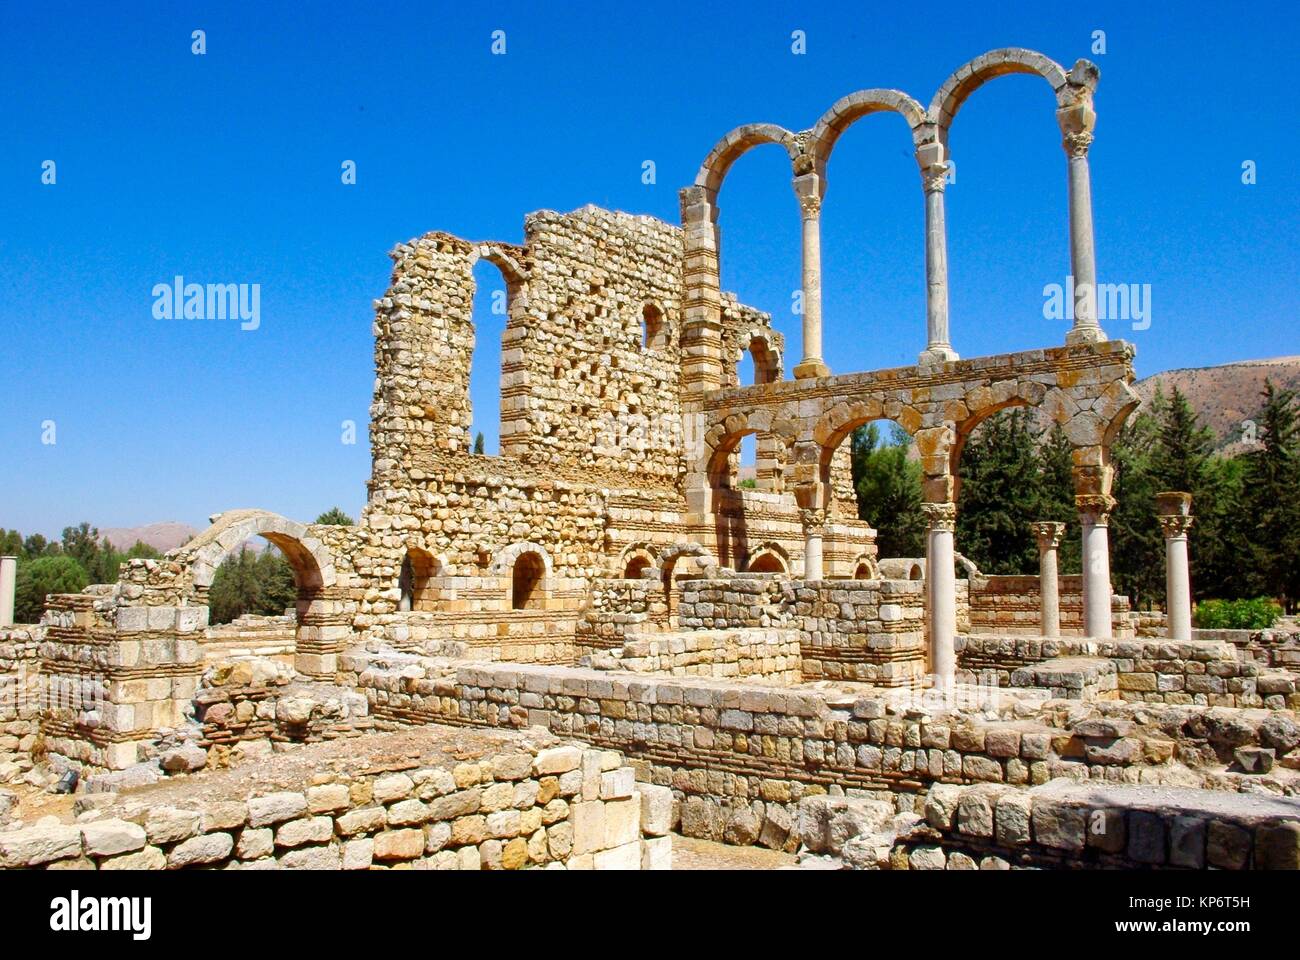 The Omayyad Palace in Aanjar (Haoush Moussa) in Bekaa Valley, Lebanon, situated at the border with Syria Stock Photo